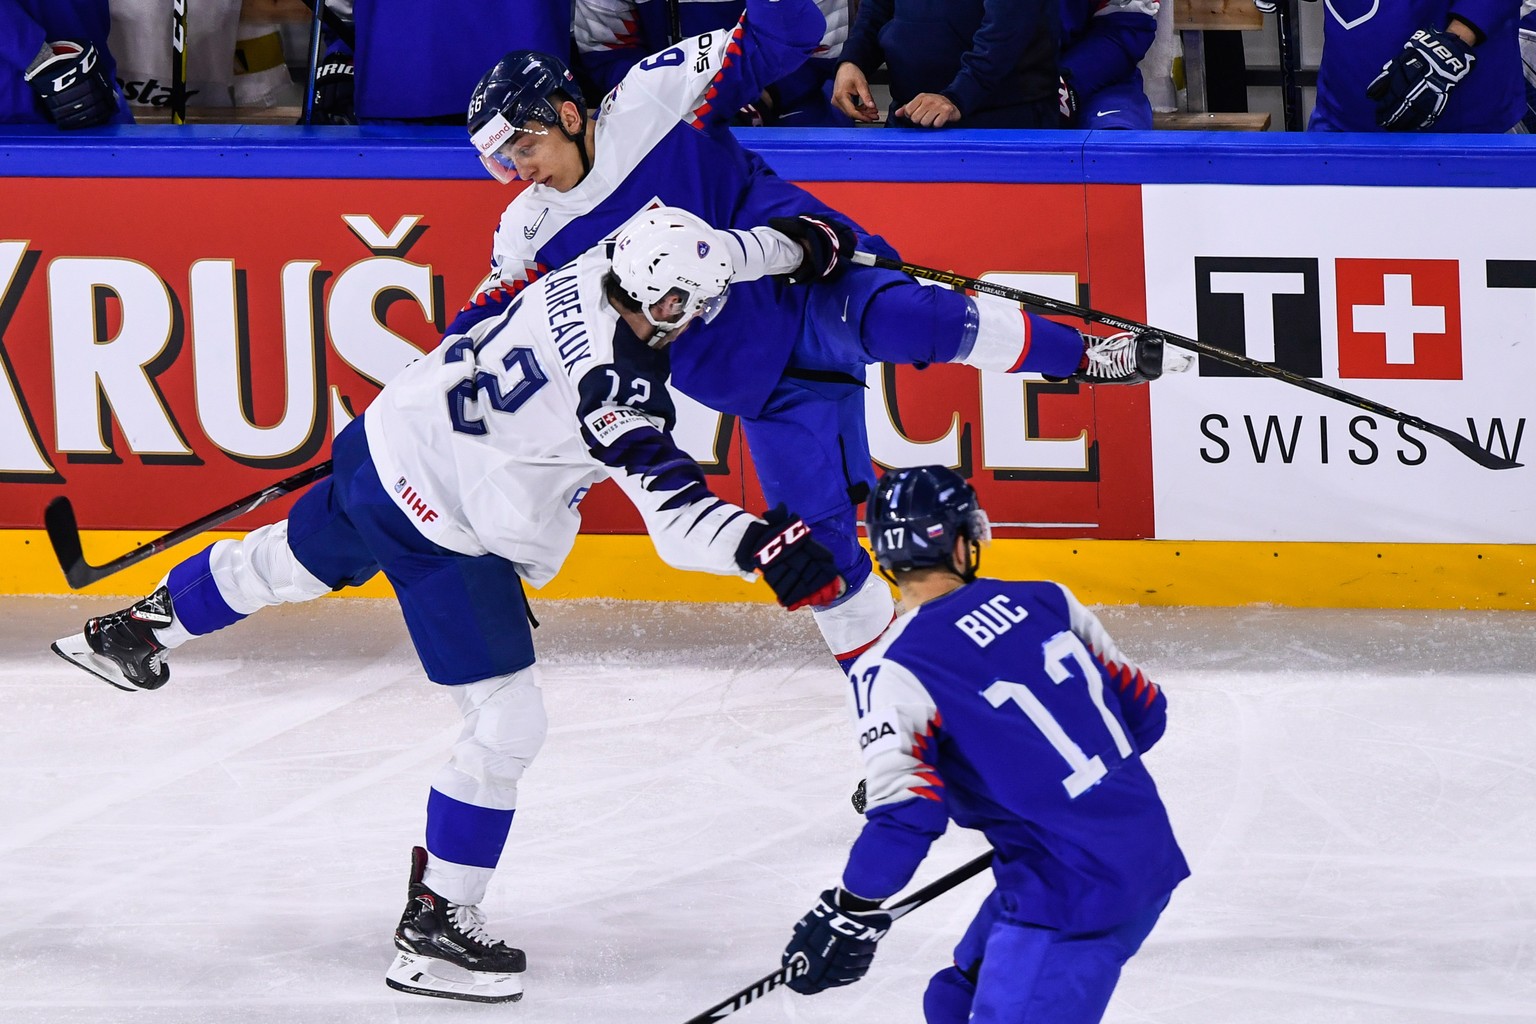 epa06725695 Valentin Claireaux (L) of France in action against Lukas Cingel (R) of Slovakia during the IIHF World Championship group A ice hockey match between Slovakia and France at the Royal Arena i ...